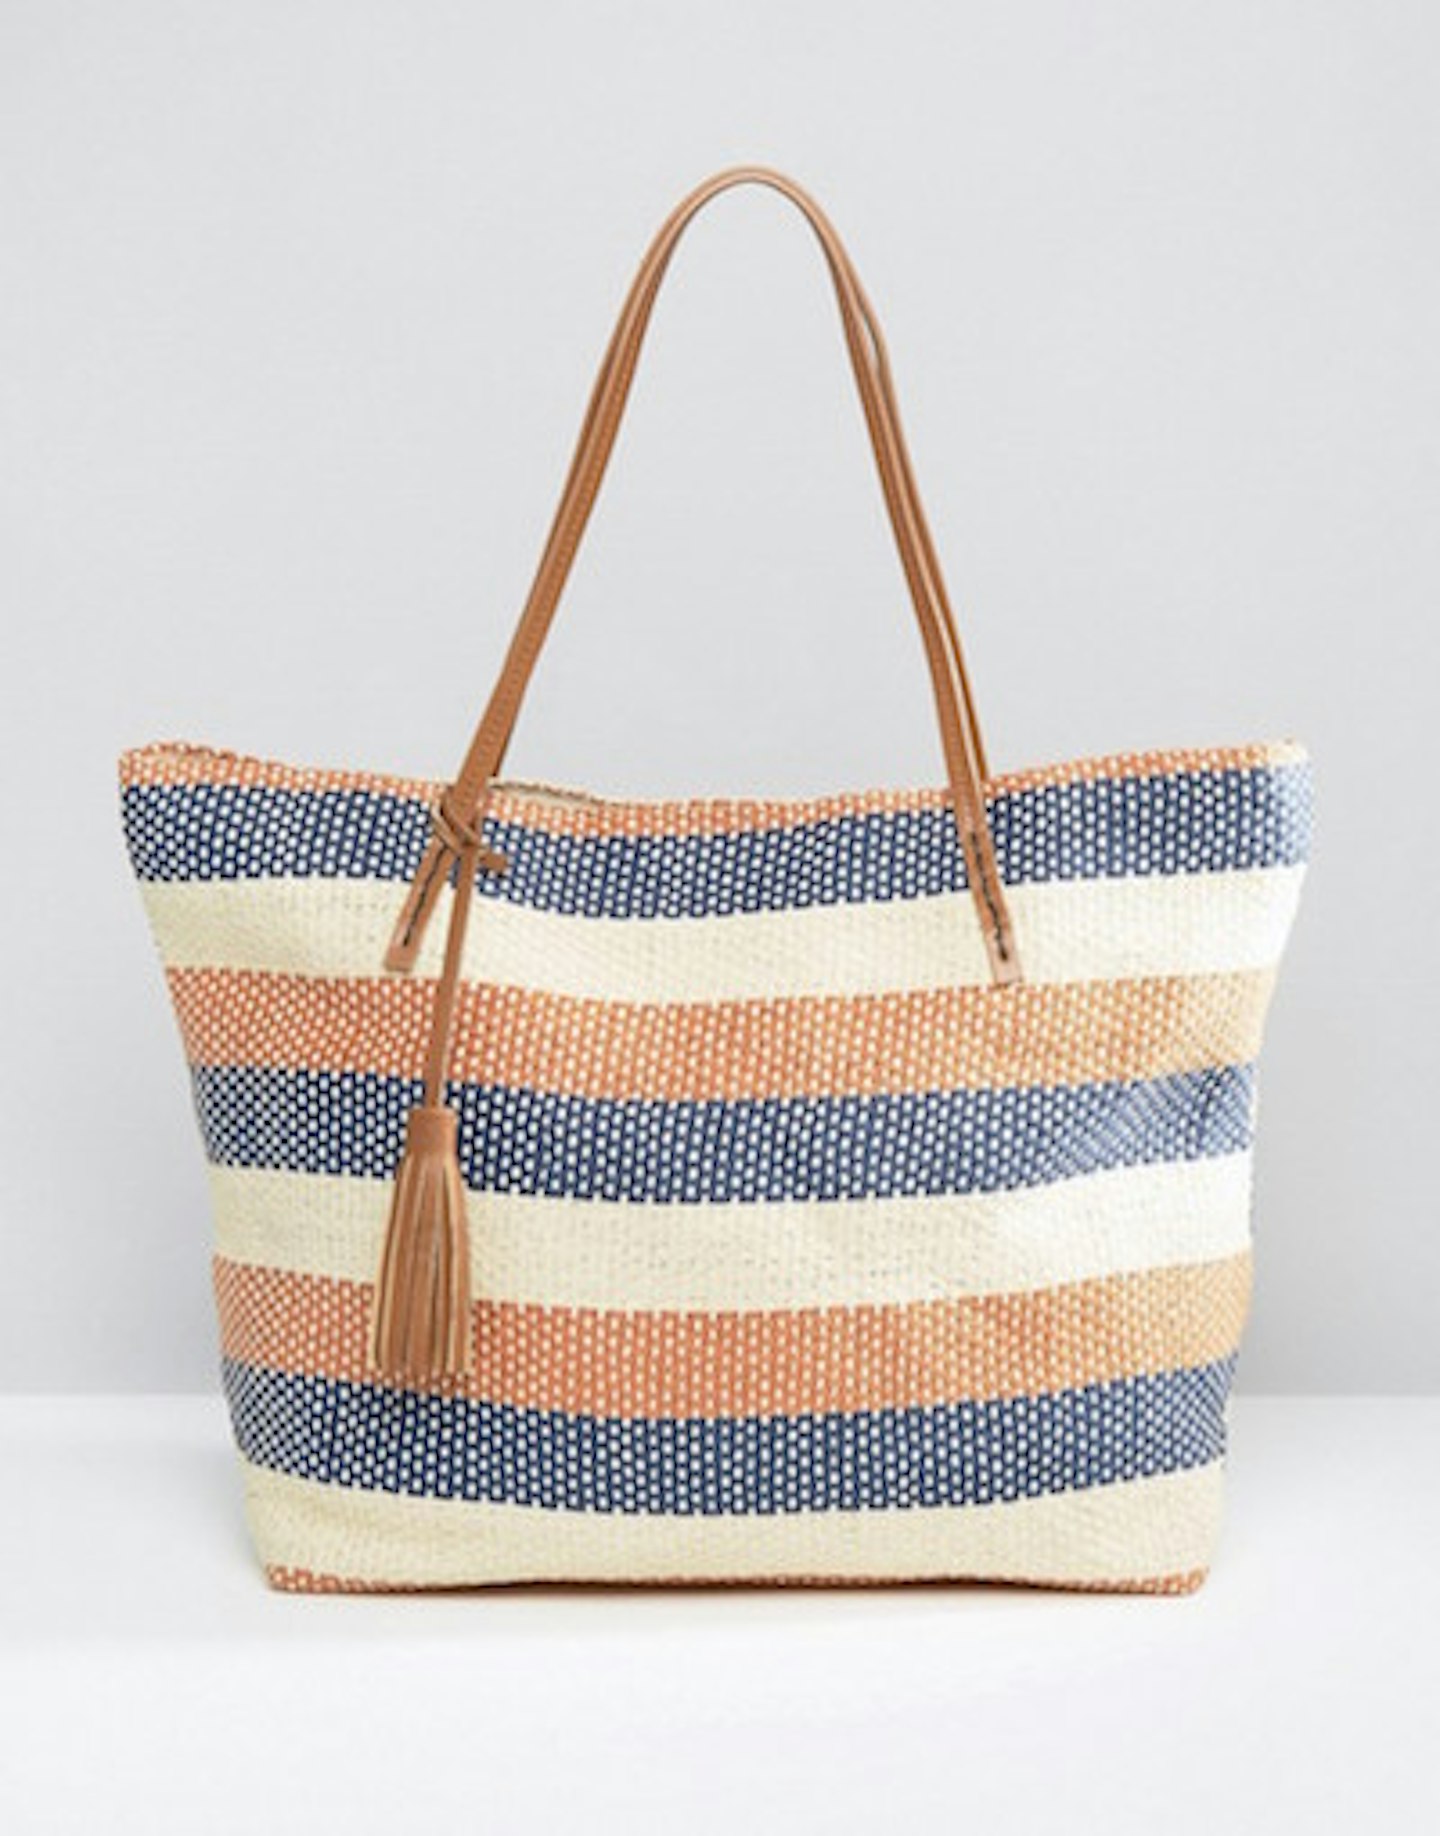 Stripped classic style beach bag.